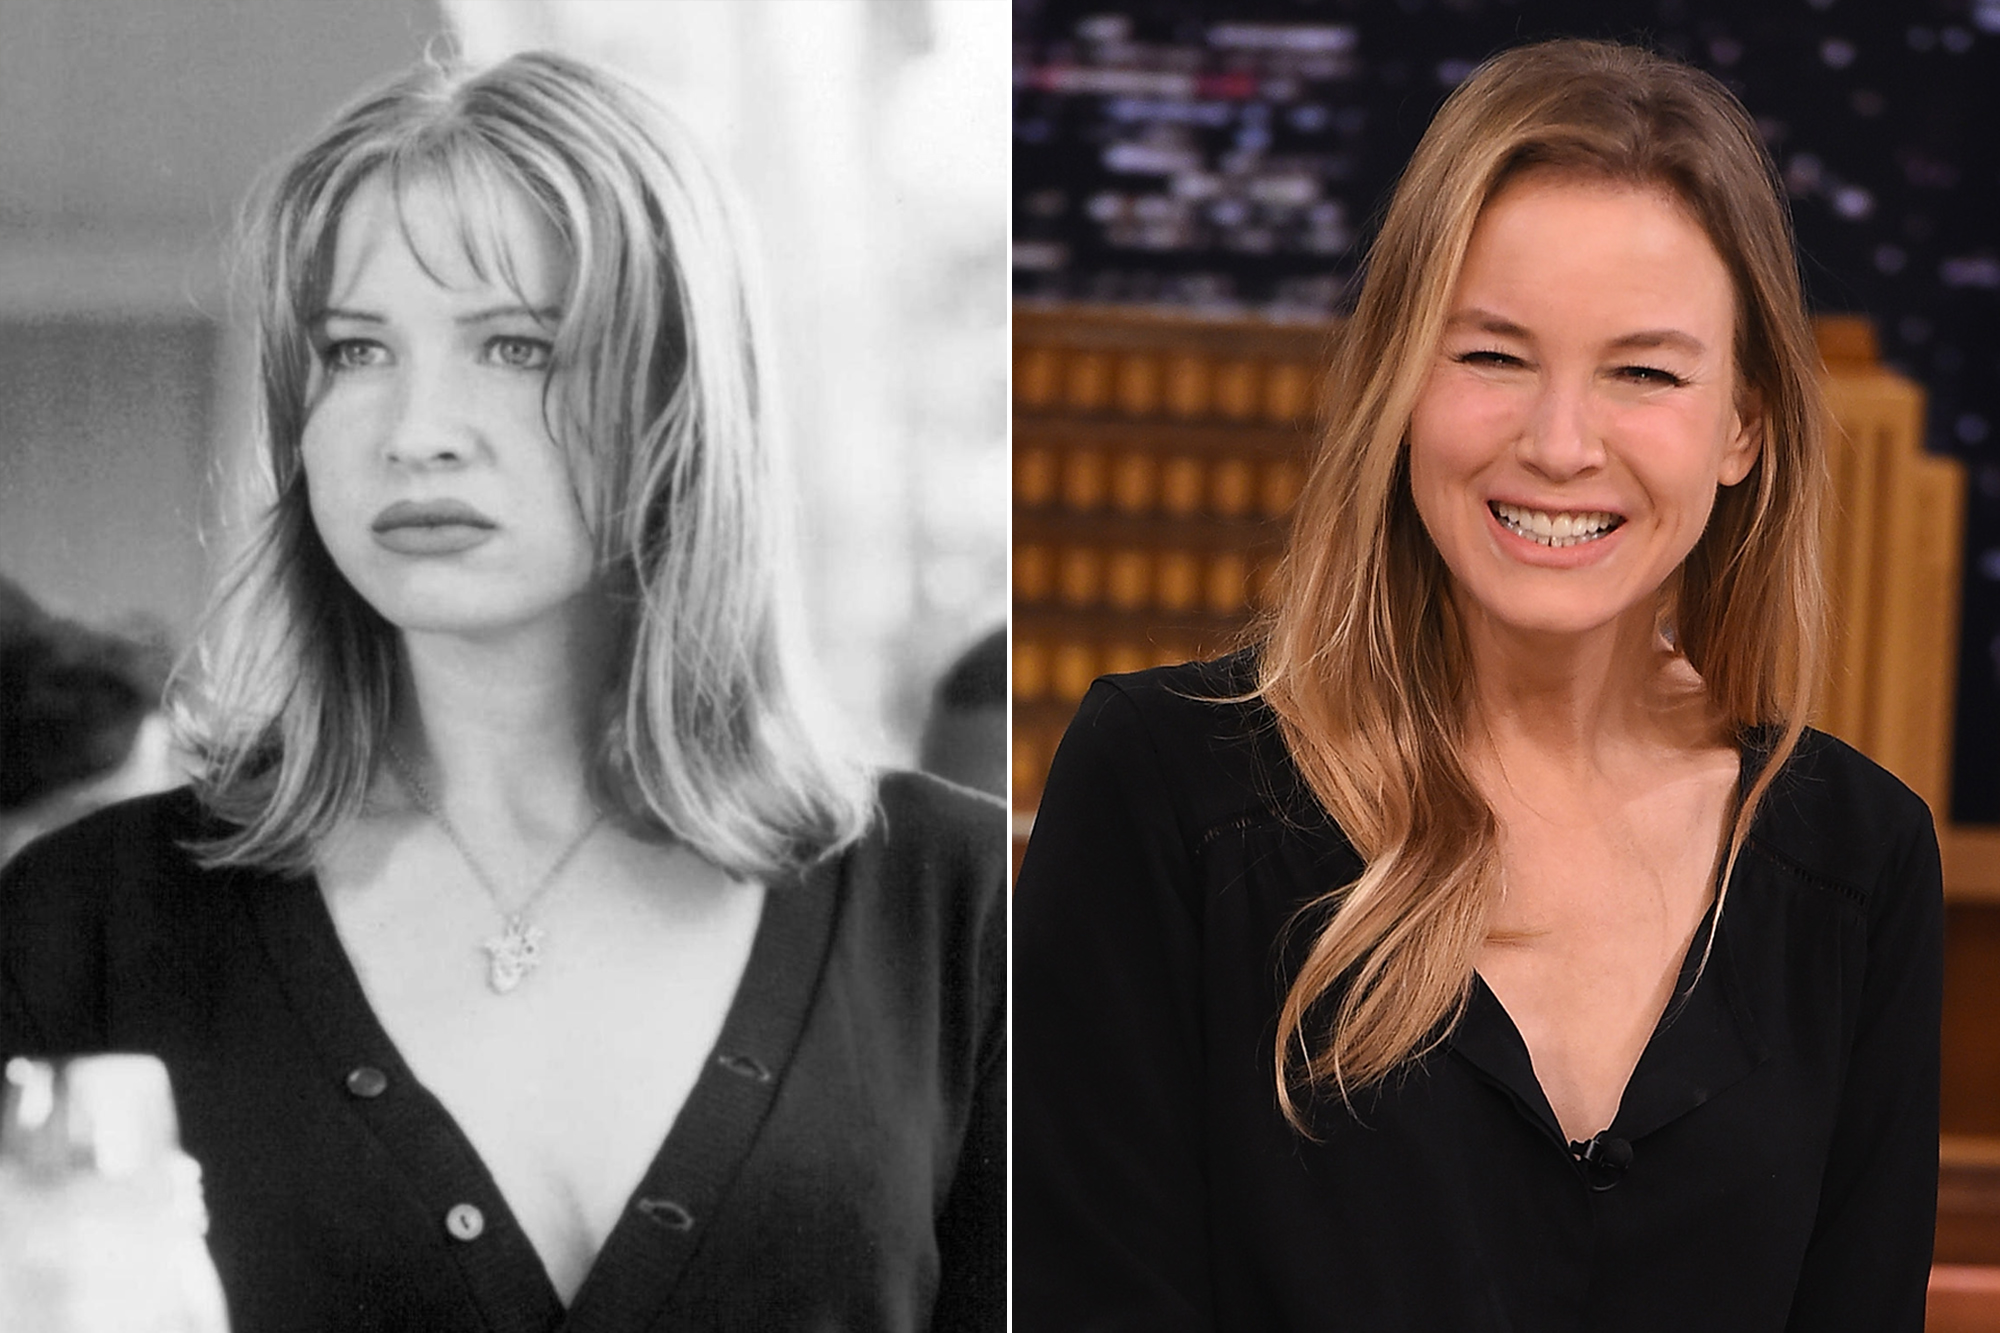 Renée Zellweger saw her career skyrocket after playing the freewheelin' Gina, with starring roles in blockbuster hits like 'Jerry Maguire,' 'Bridget Jones's Diary' and 'Chicago.' She later scored an Oscar for her role in 'Cold Mountain' and, most recently, reprised her role as Bridget Jones in 'Bridget Jones's Baby'